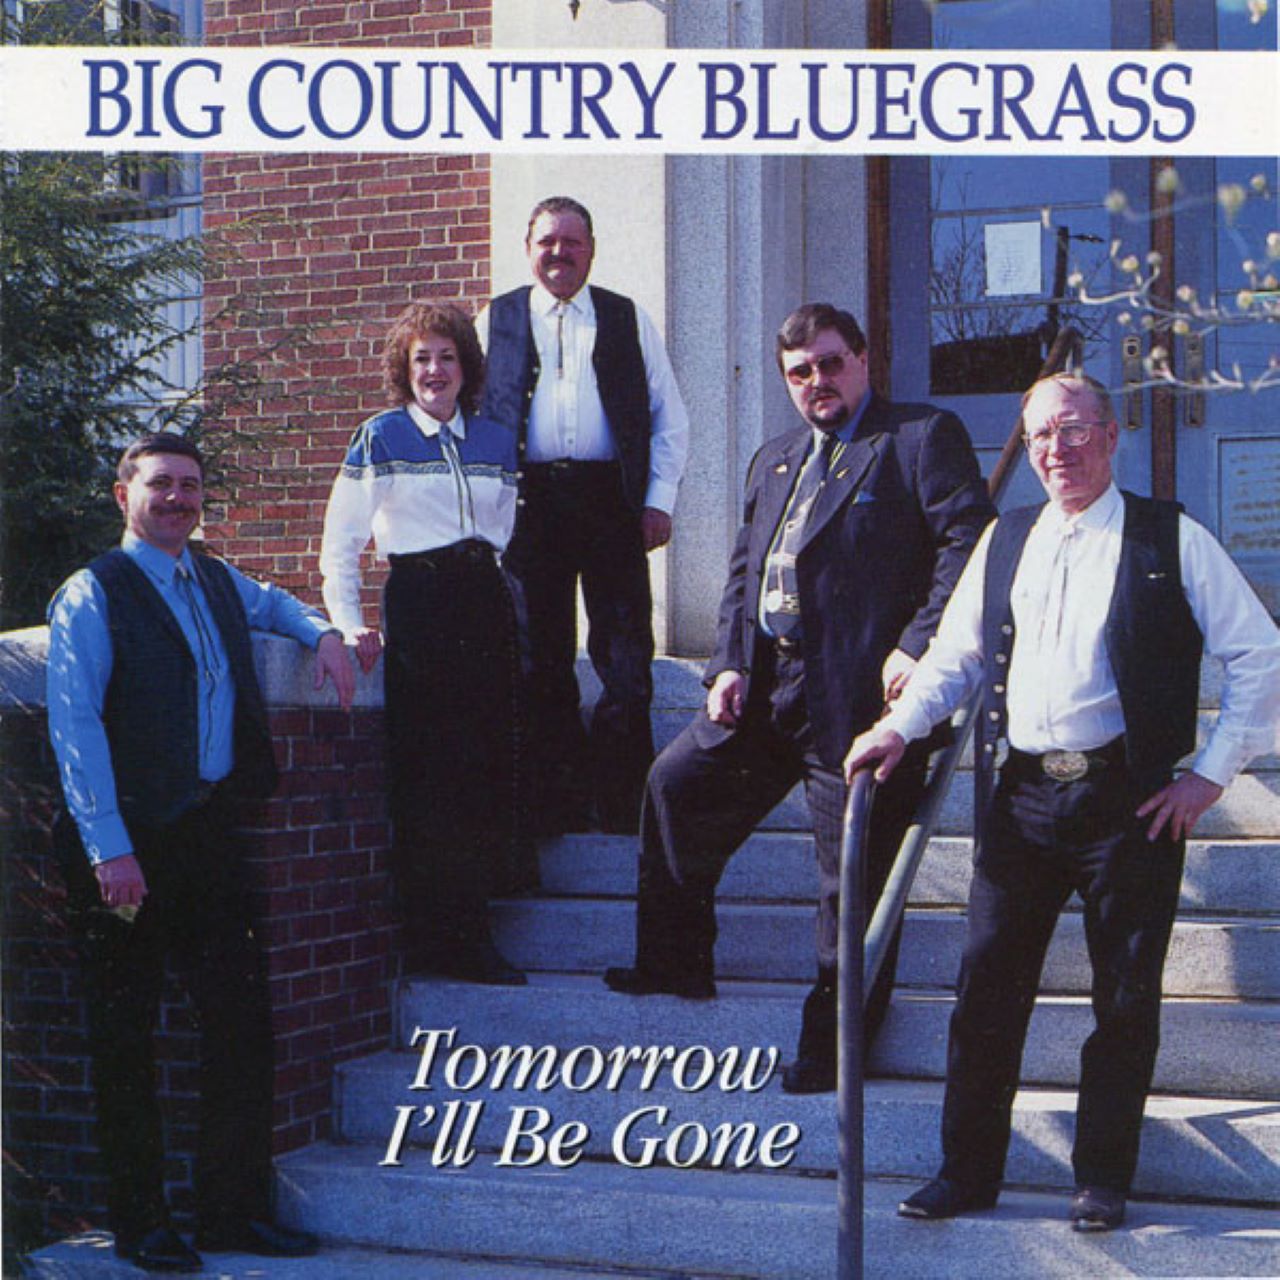 Big Country Bluegrass - Tomorrow I’ll Be Gone cover album